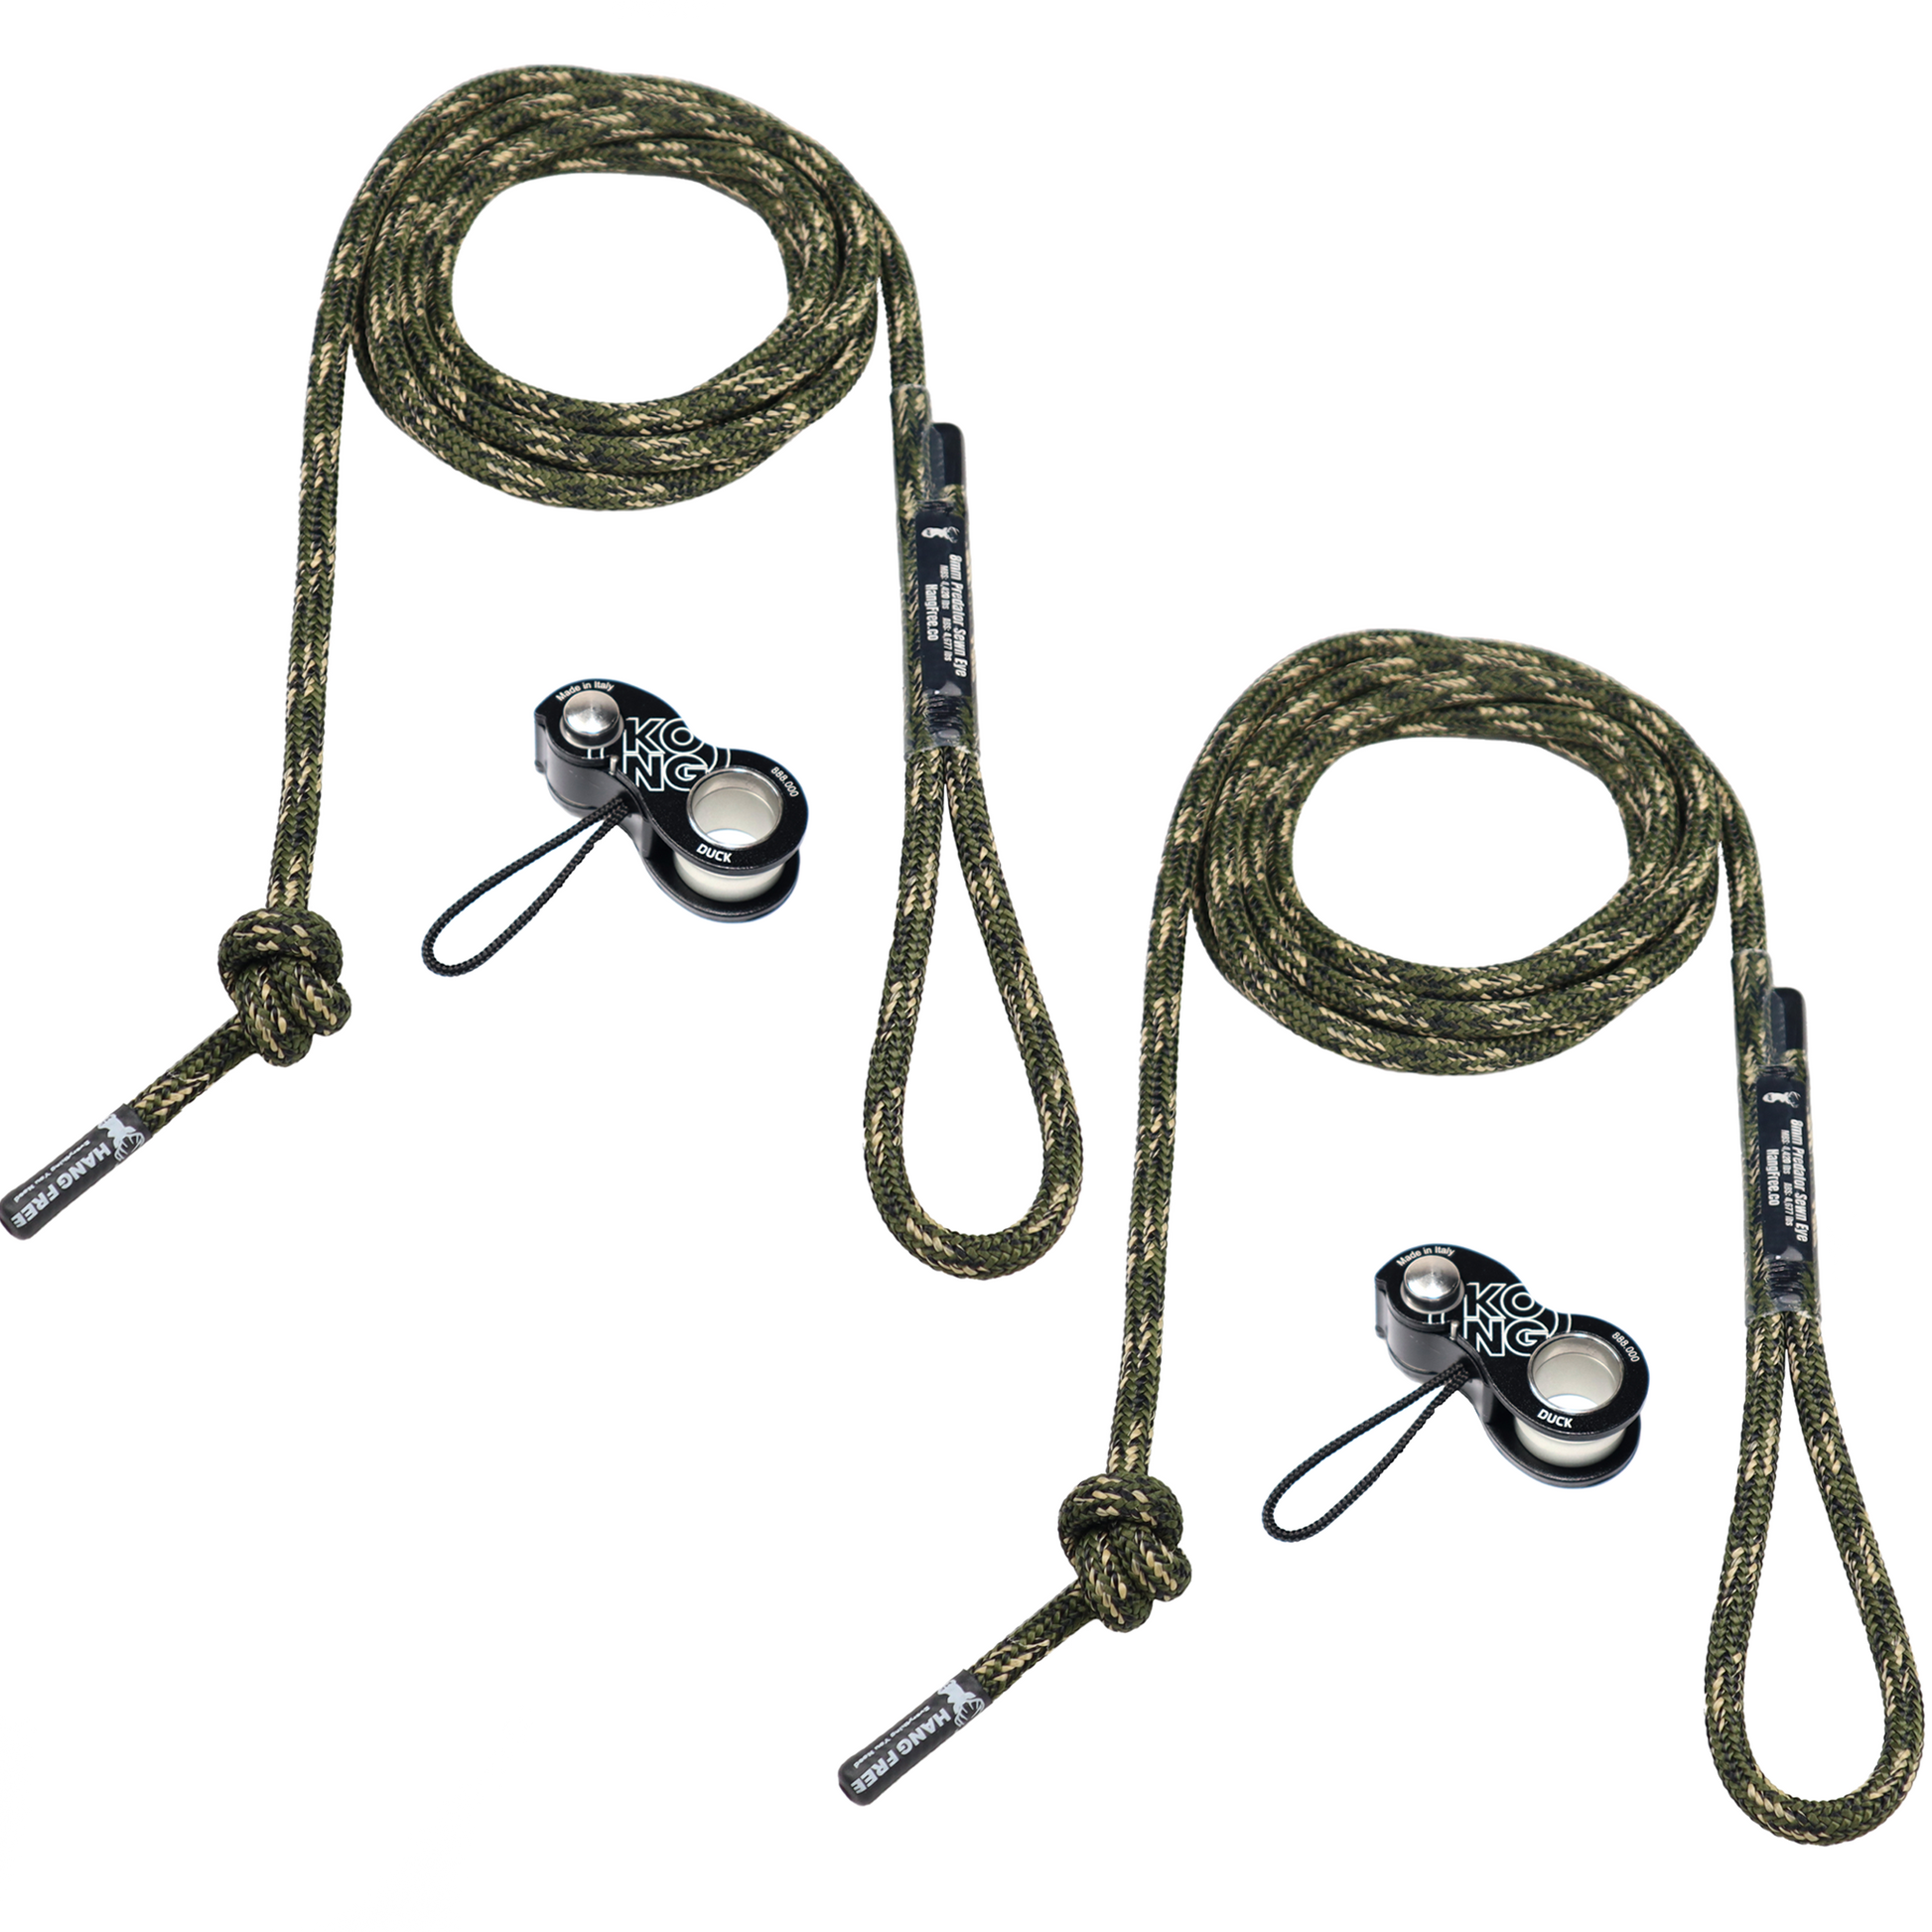 Deluxe Predator Tether and Lineman's Package with Kong Ducks in Predator Camo